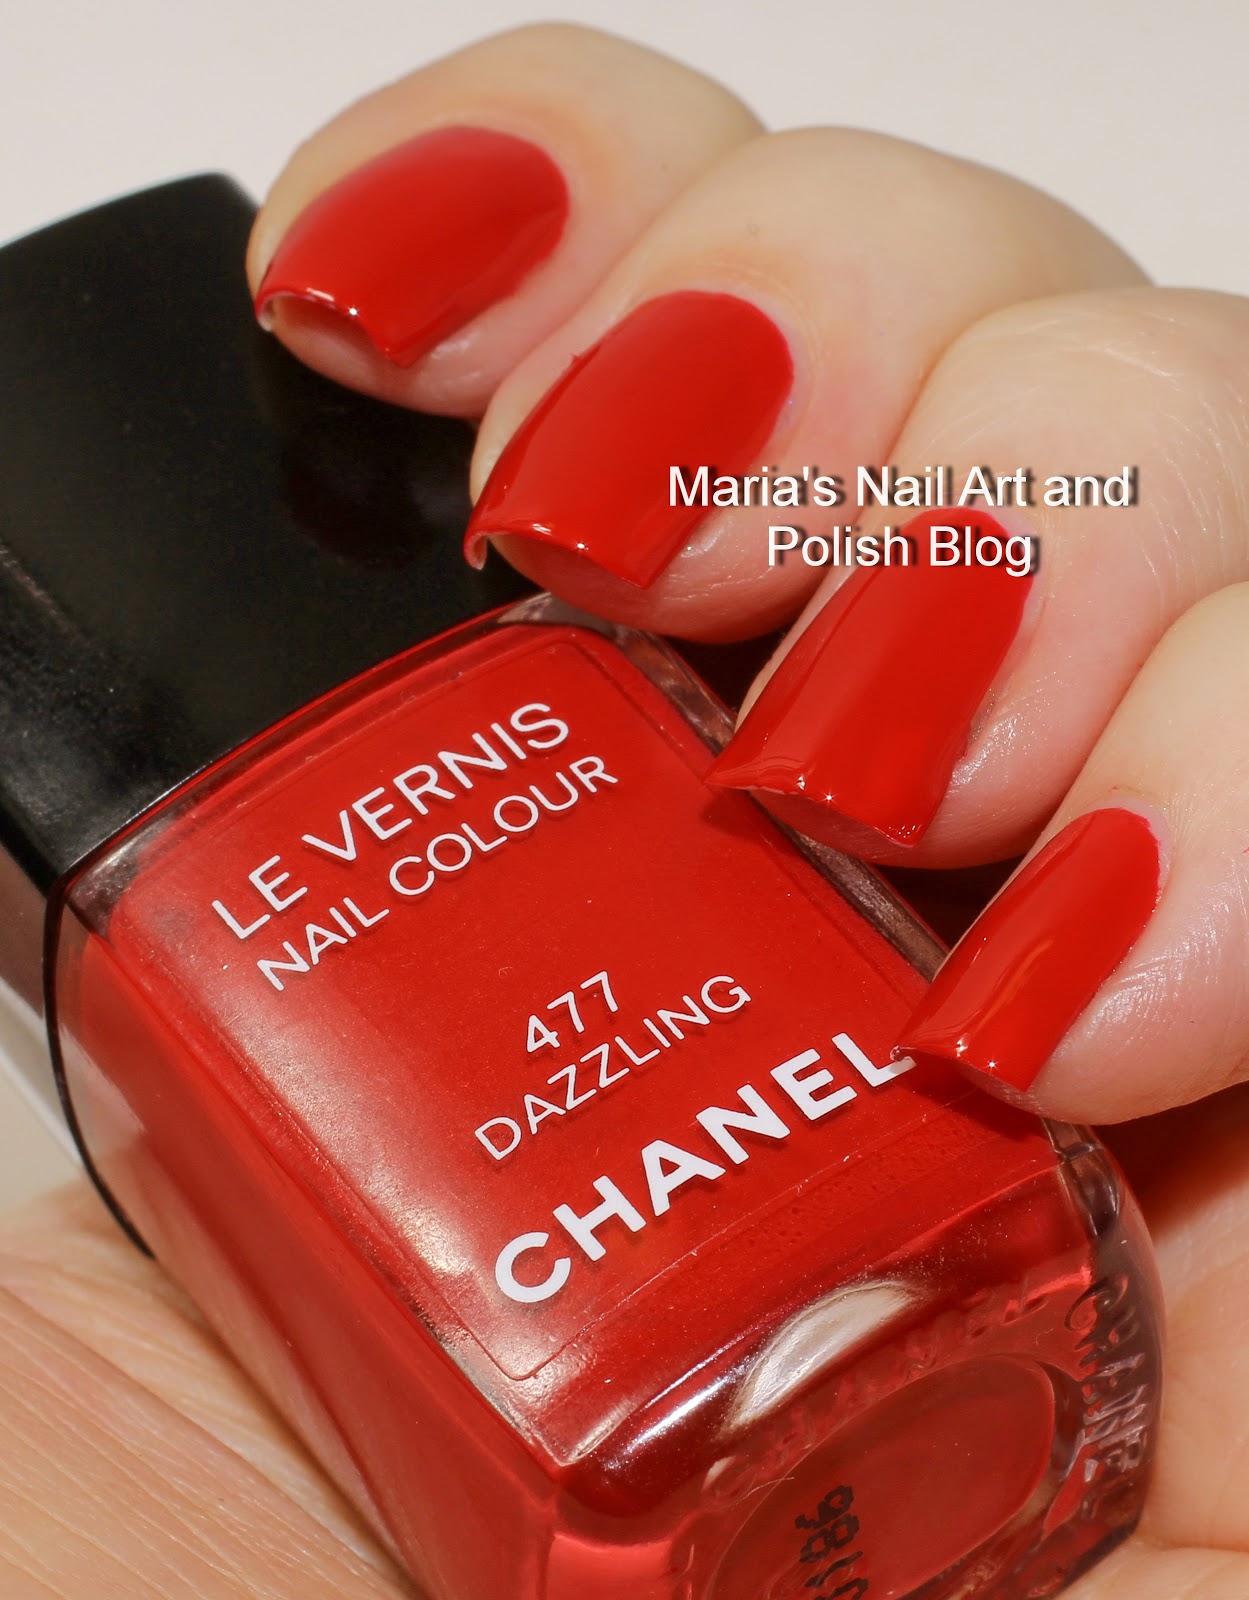 Marias Nail Art and Polish Blog: Chanel Dazzling 477 and Delice